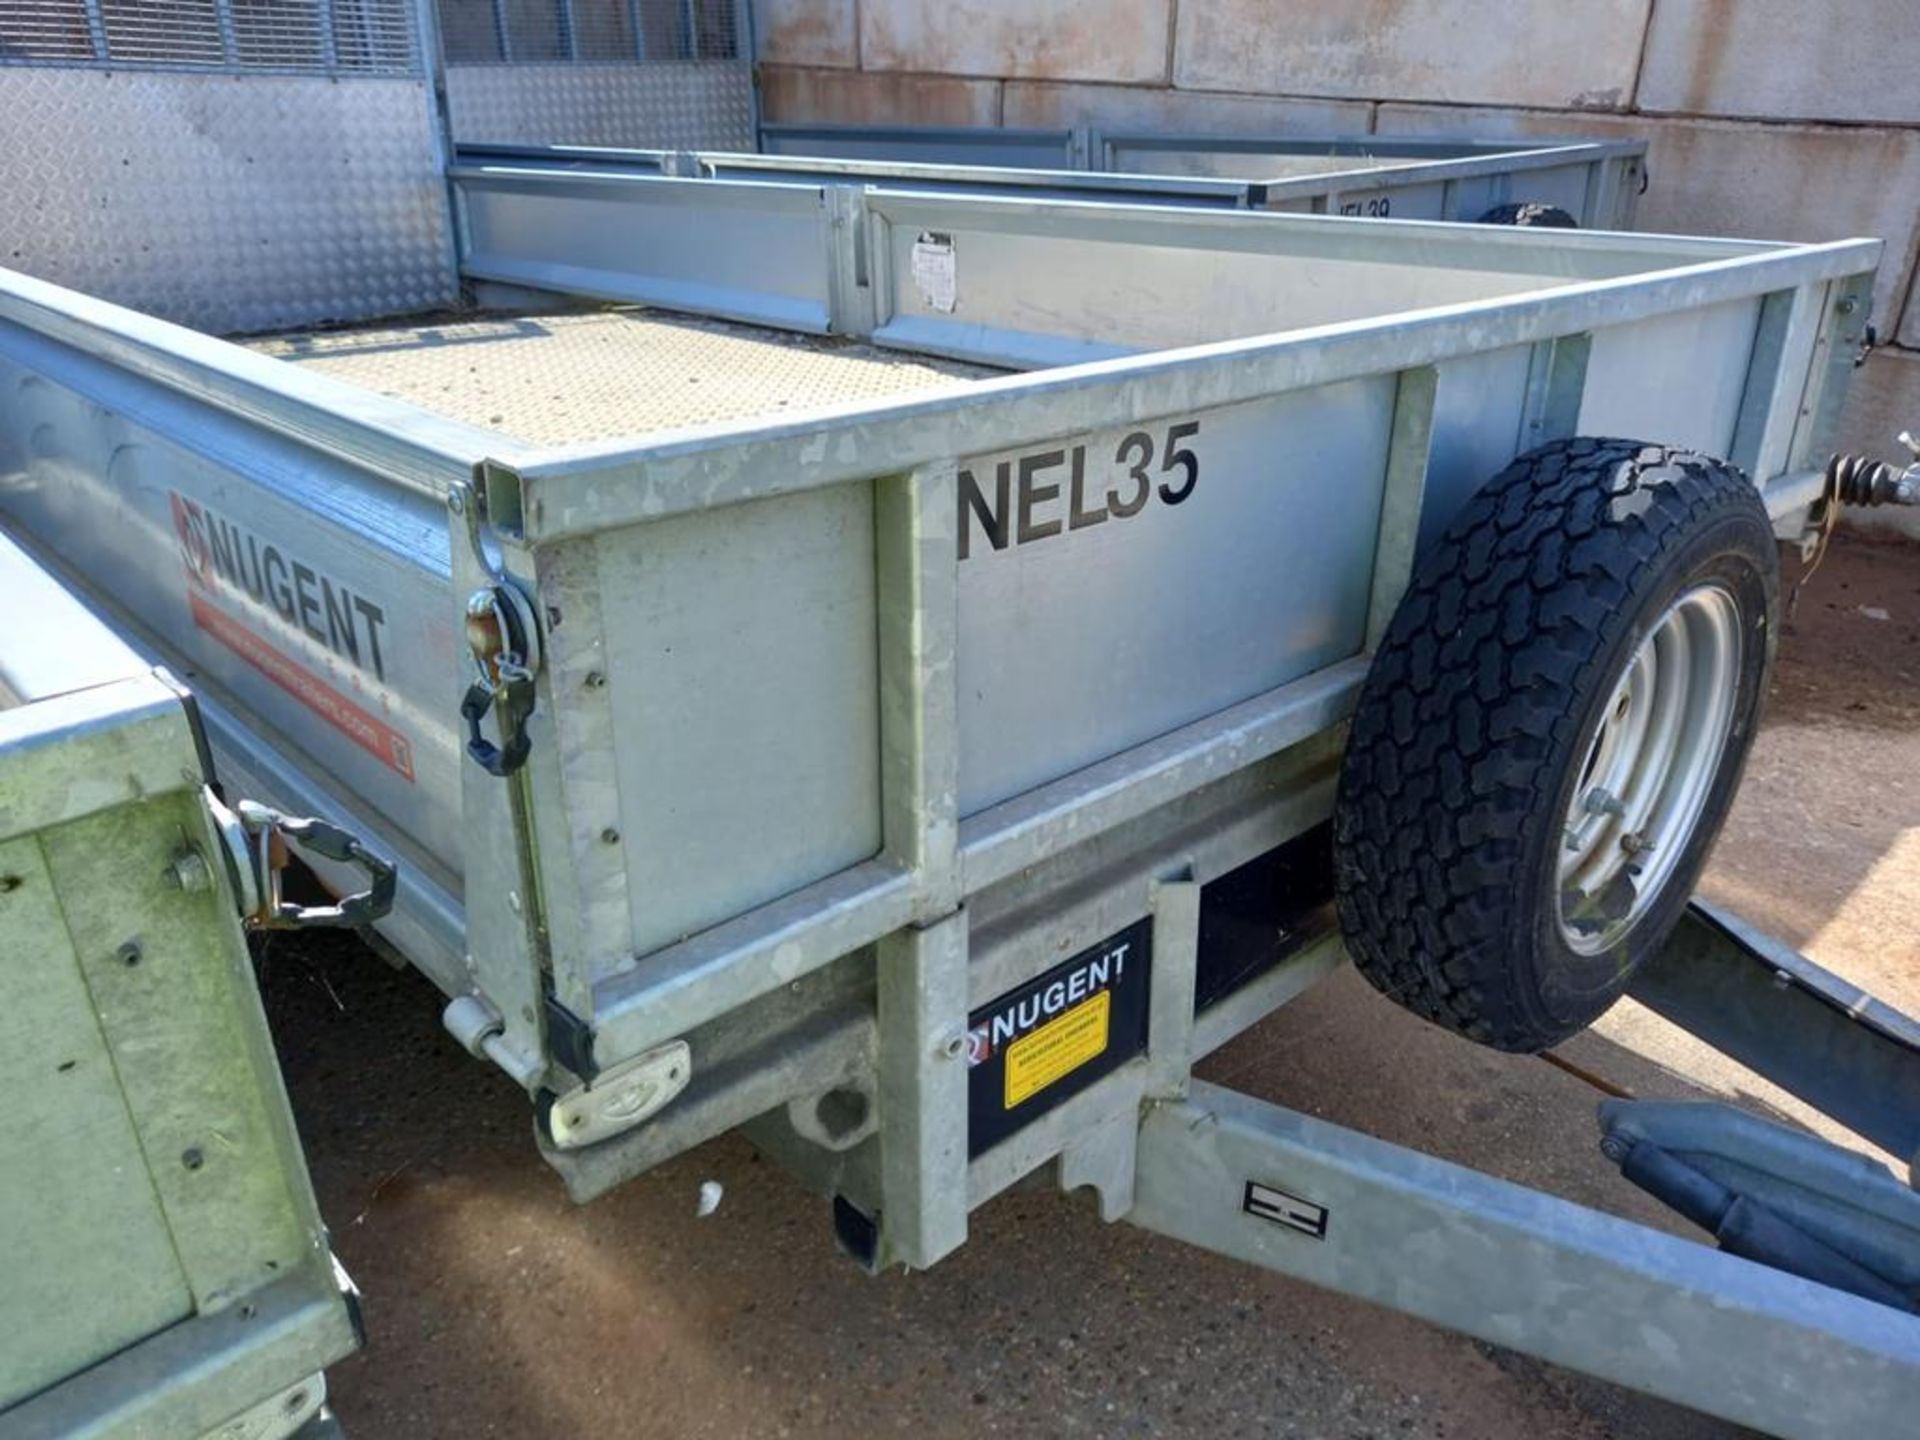 Nugent Twin Axle Beavertail Trailer (NEL35) - Image 4 of 6